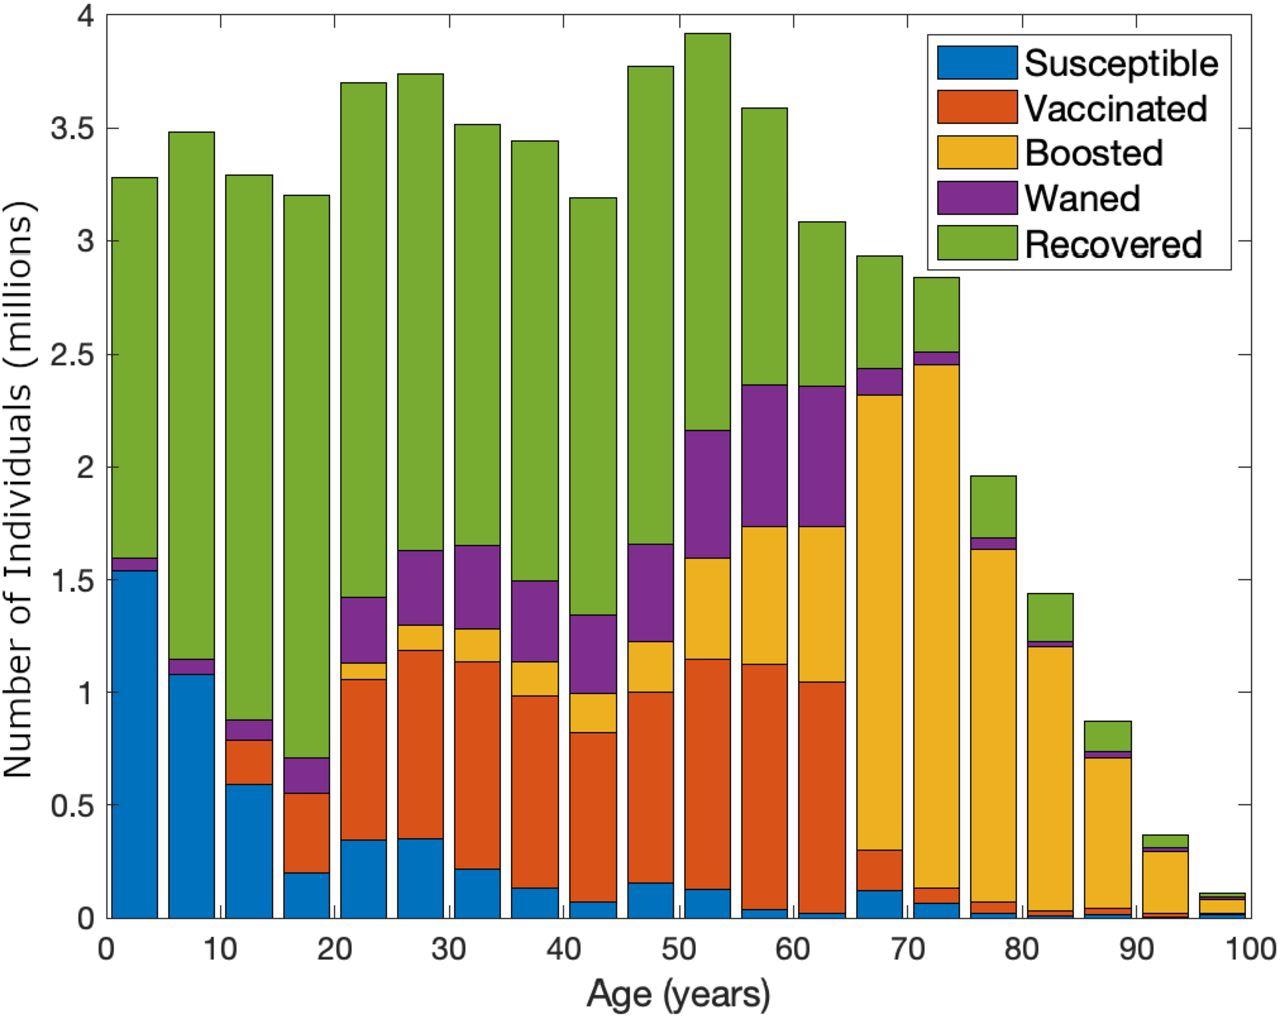 Estimated distribution of immune status by age from the model at the start of December 2021. Susceptible individuals (who have no protection, blue) are concentrated in the youngest age-groups, while those whose immunity is from infection (recovered in green) are generally below 60. For those above 60 years old, the vast majority are protected by booster vaccines (yellow).